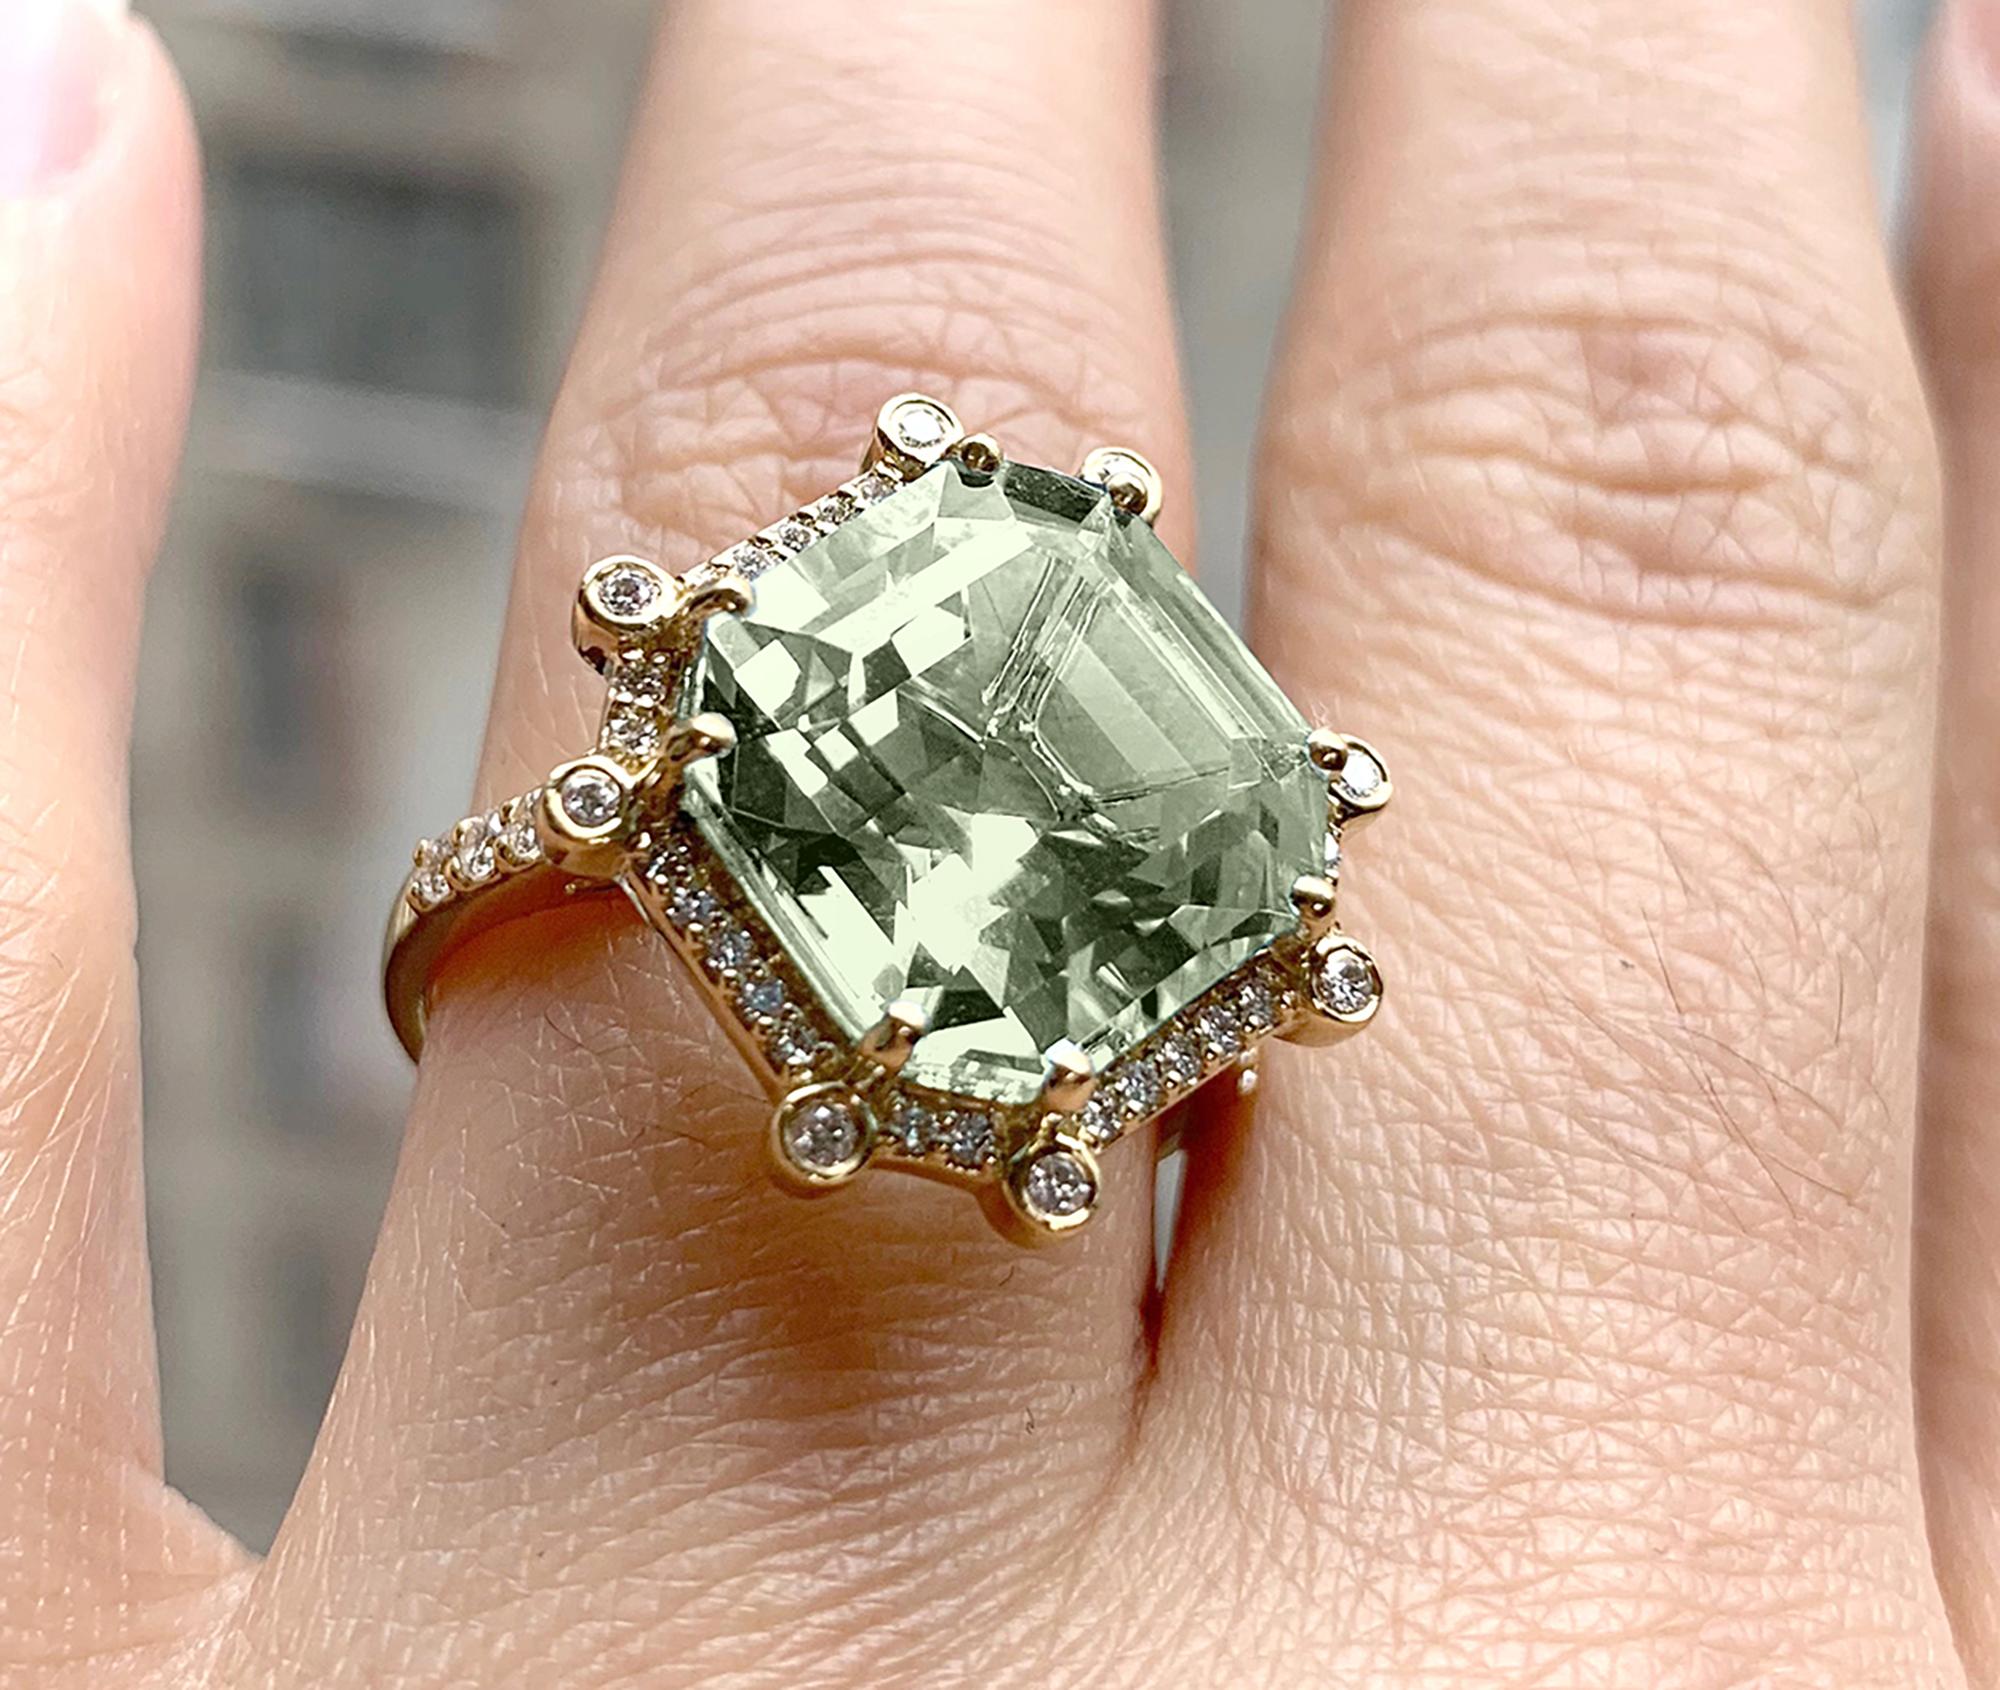 Prasiolite Emerald Cut Octagon Ring in 18K Yellow Gold with Diamonds, from 'Gossip' Collection

Stone Size: 12 x 12 mm 

Diamonds: G-H / VS, Approx Wt: 0.36 Cts